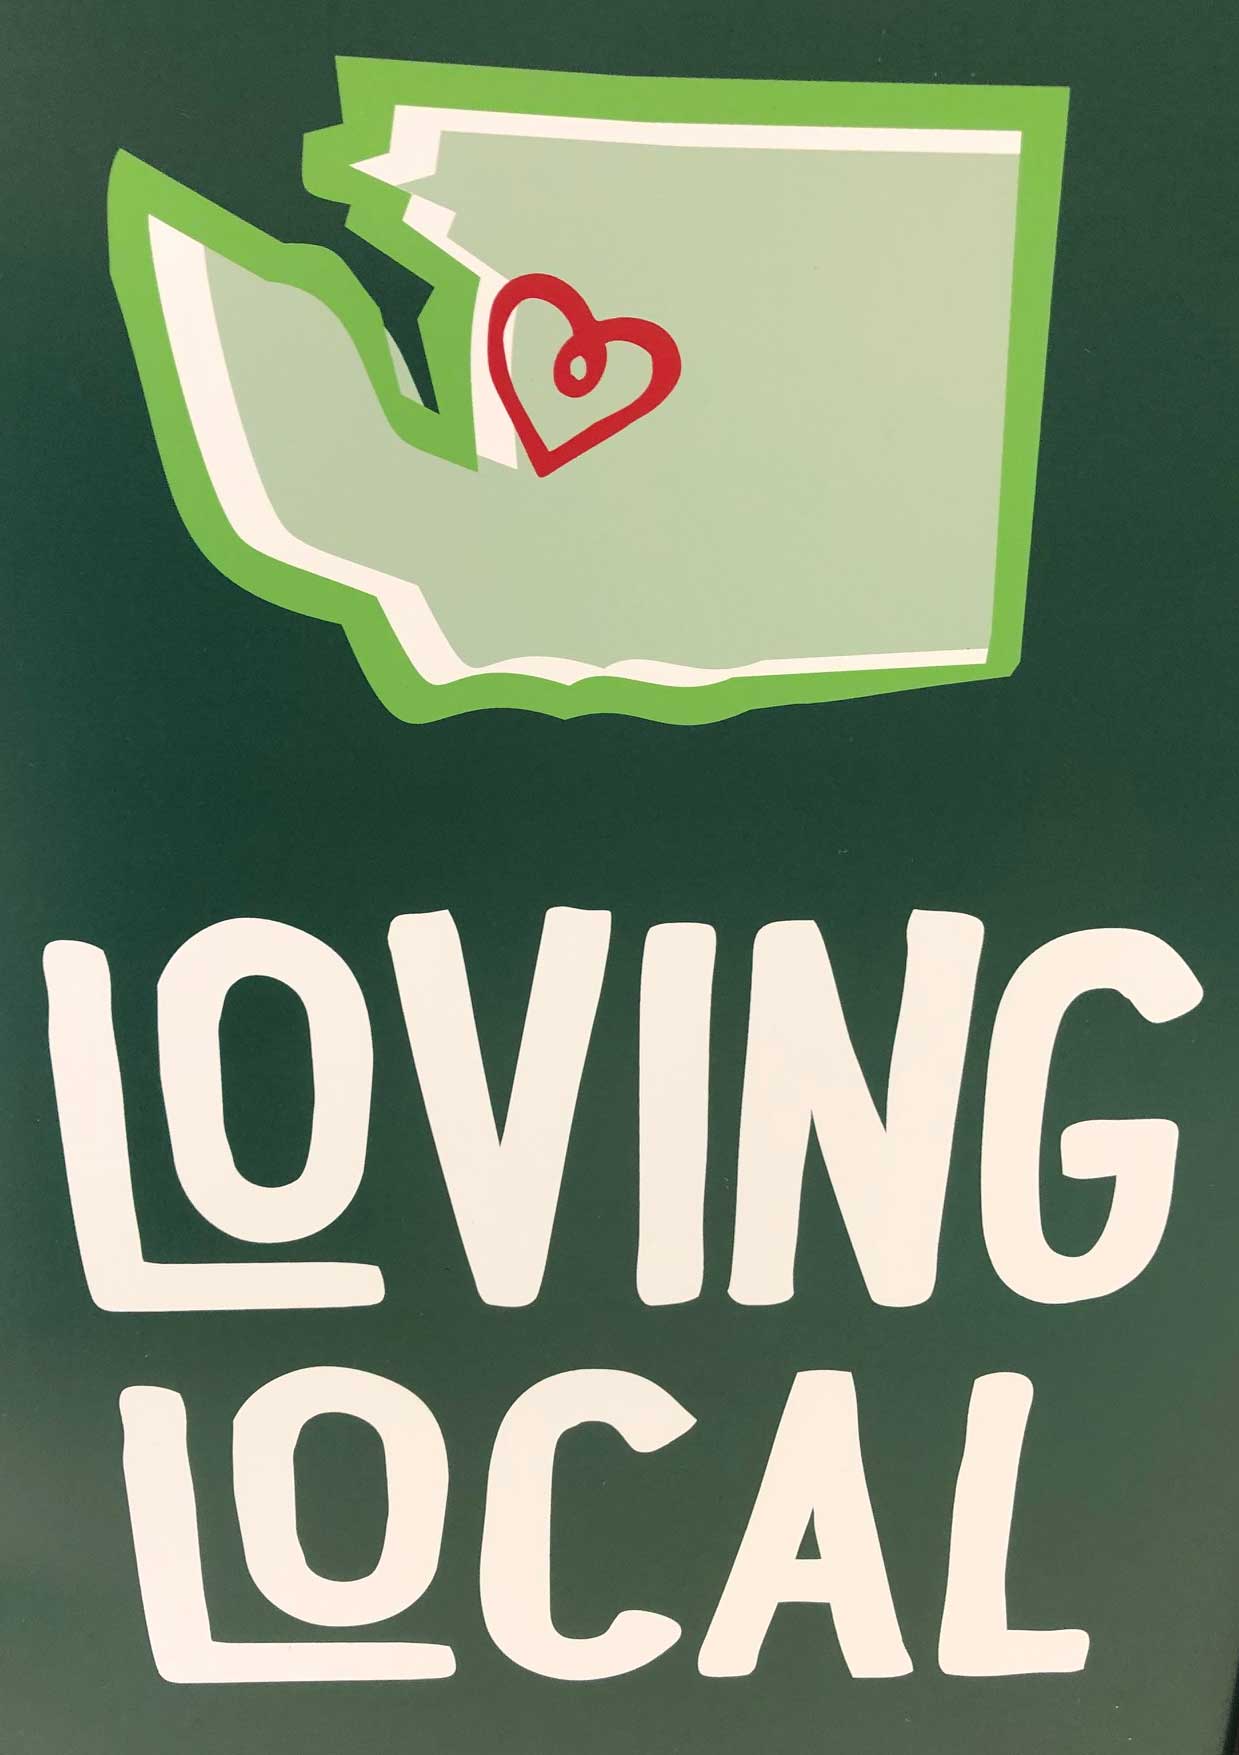 Eat Local First is coming to a market near you!